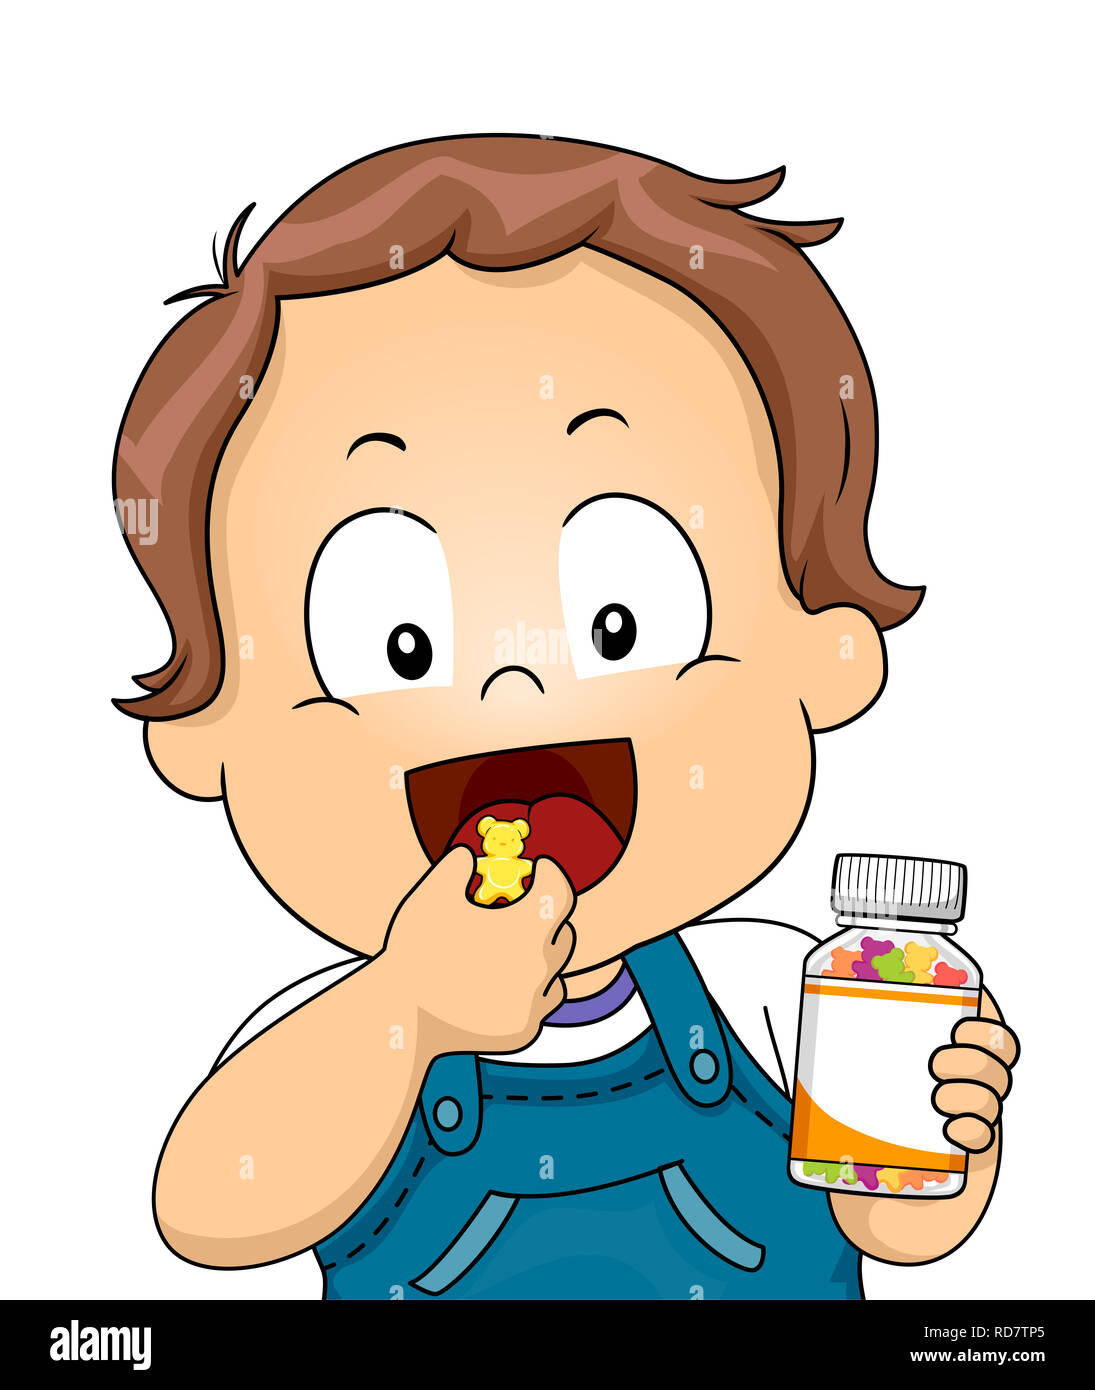 Illustration of a Kid Boy Toddler Holding a Bottle of Vitamins and About to  Chew One Stock Photo - Alamy